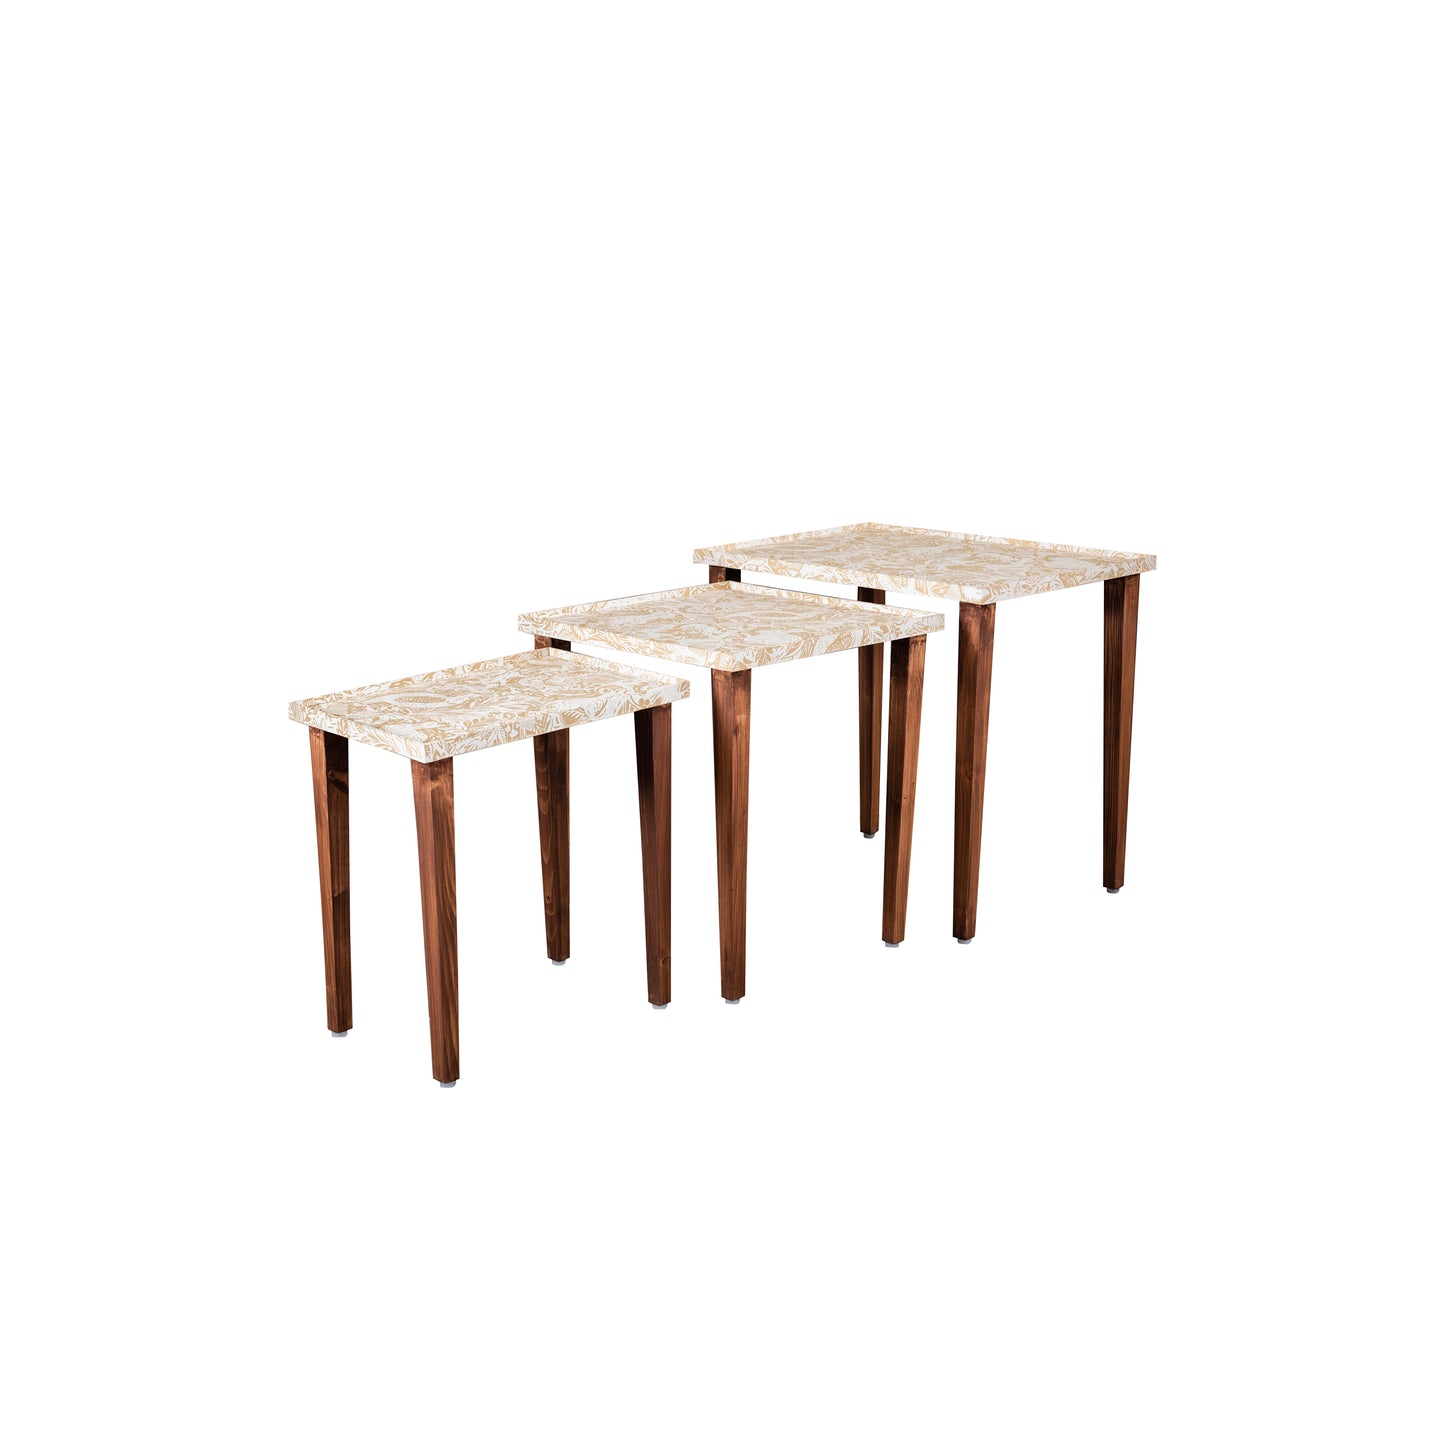 A Tiny Mistake Jungle Wooden Rectangle Nesting Tables (Set of 3), Living Room Decor